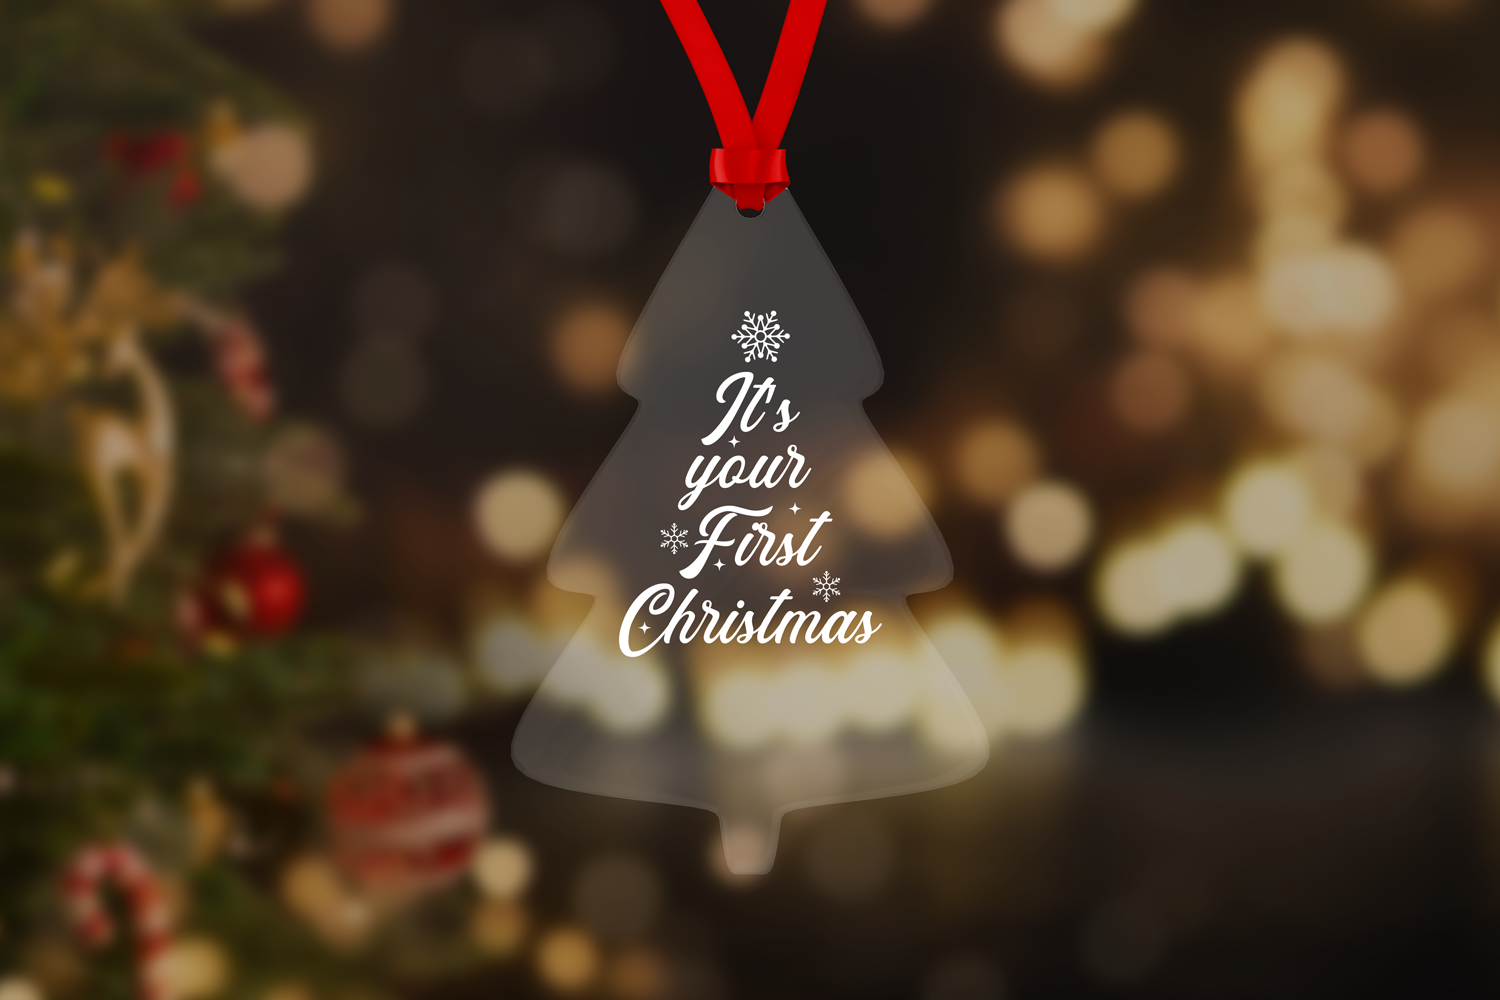 Transparent acrylic Christmas tree ornament mockup with a red ribbon